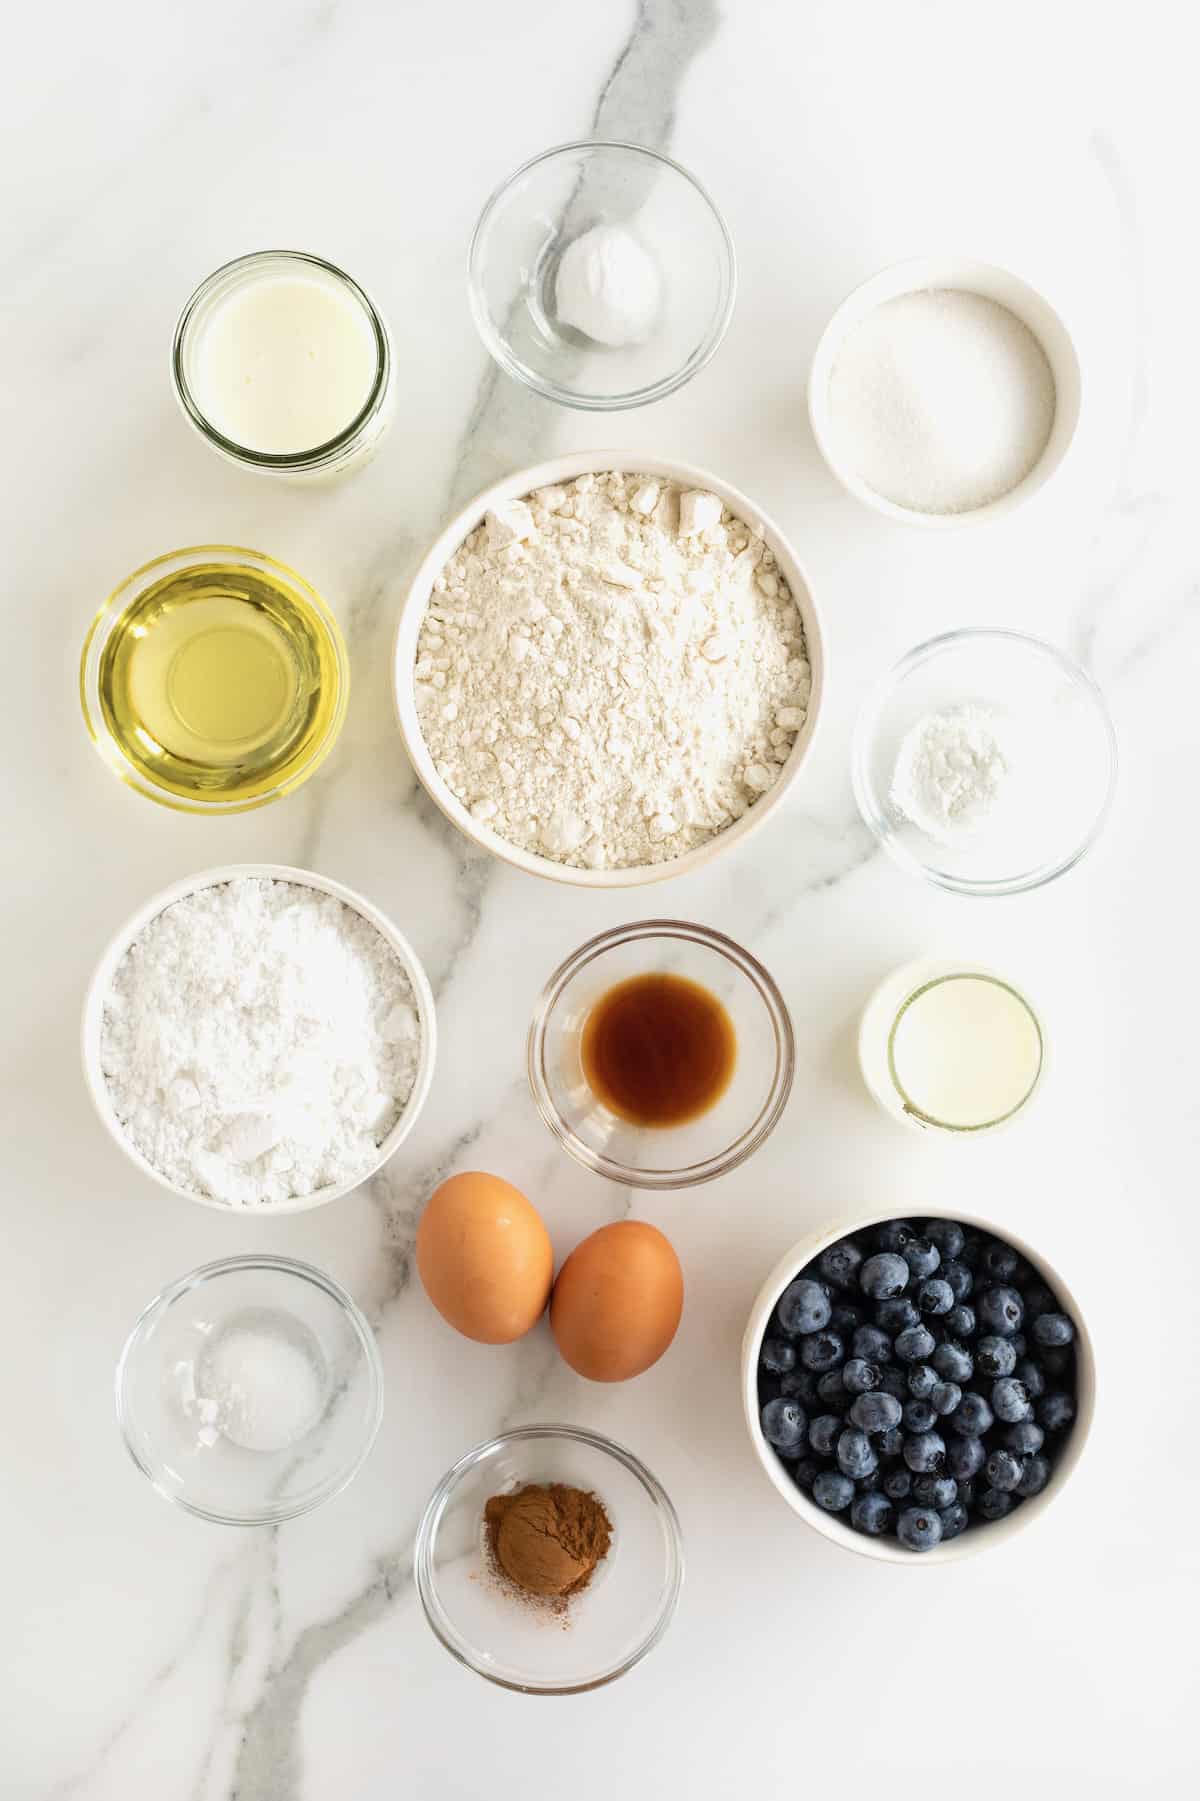 Ingredients used to make blueberry cake waffles in small glass dishes on a white marble counter